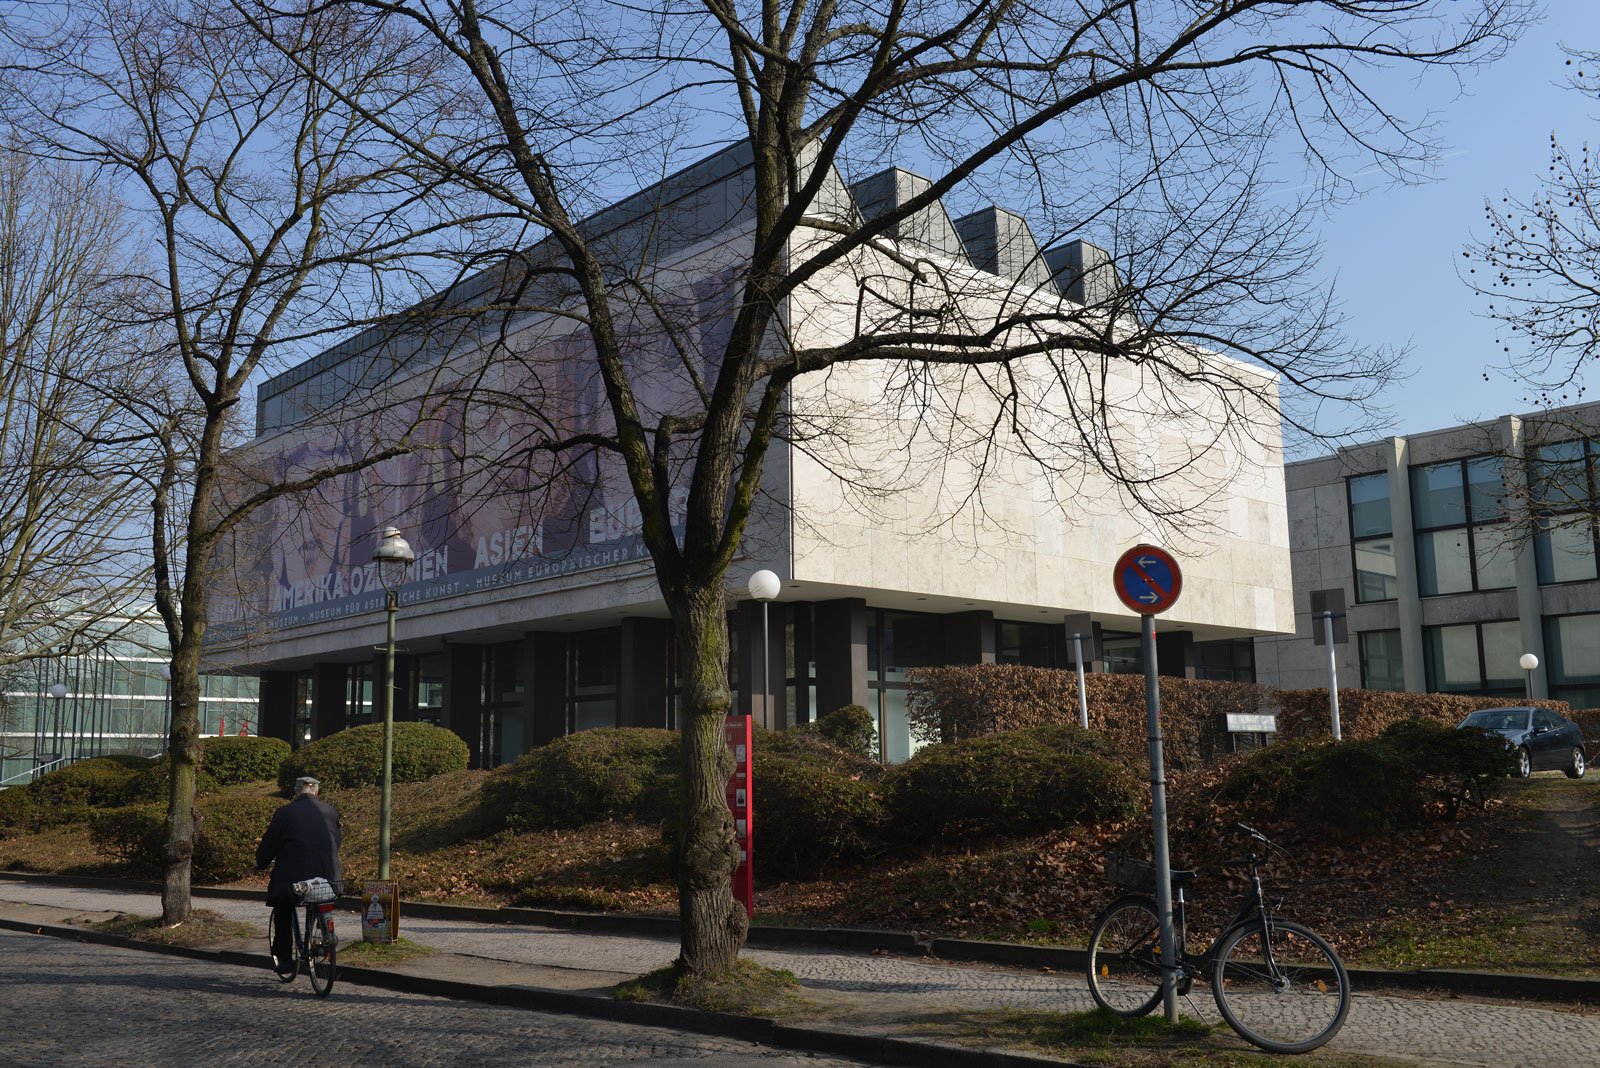 The Dahlem museums, Berlin, March 11, 2014 